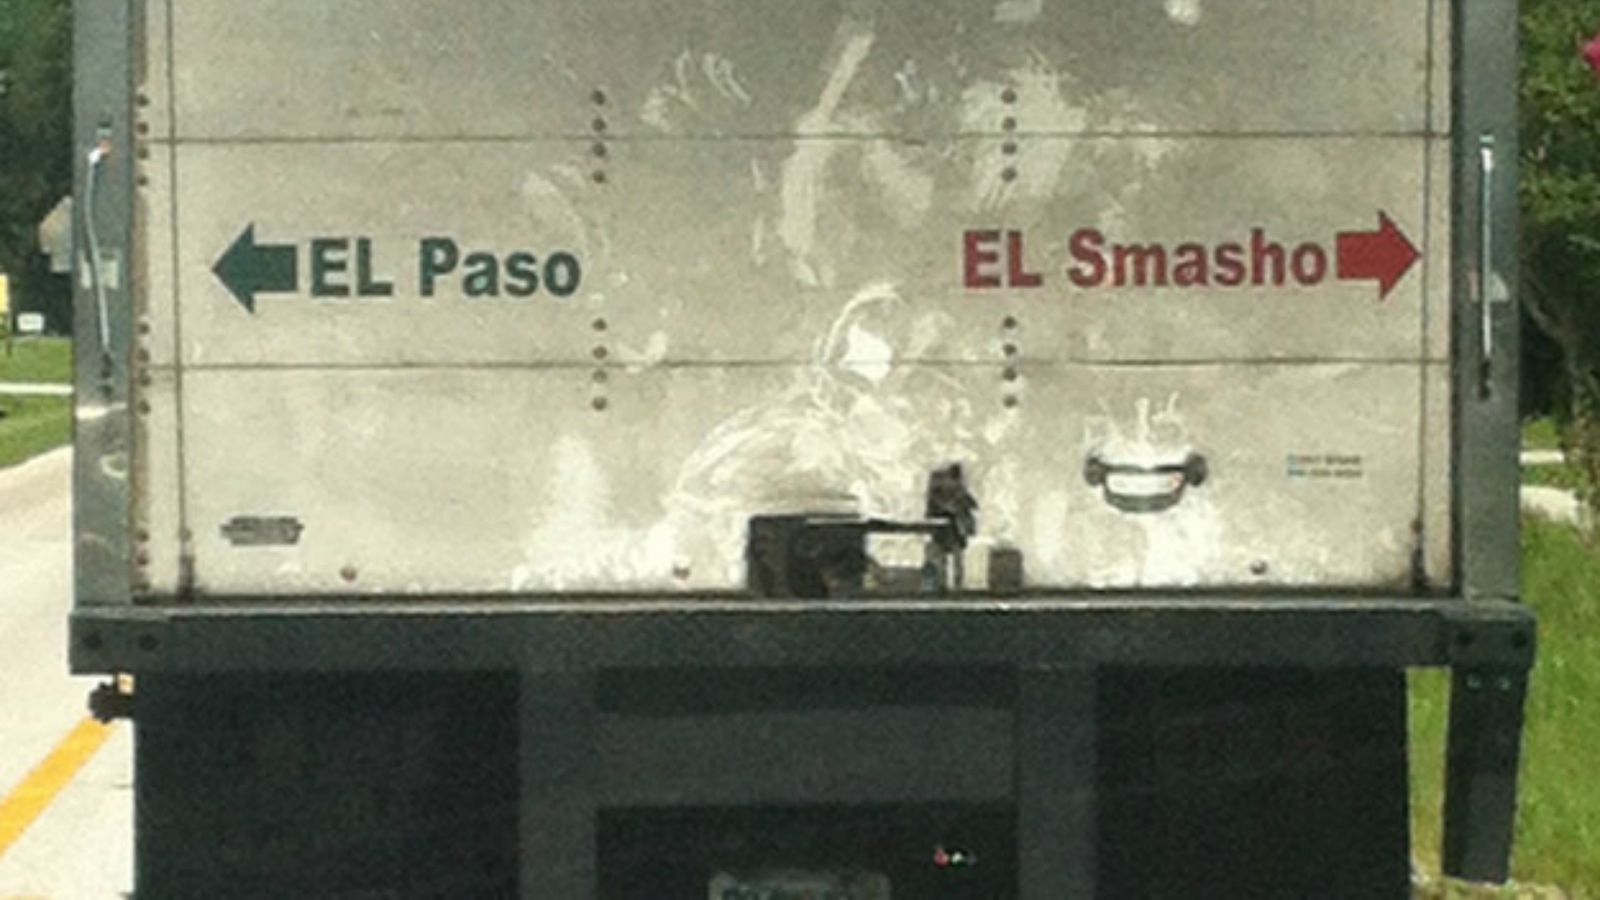 31 Truck Signs That Will Have You Doing a Double Take on the Way to Work